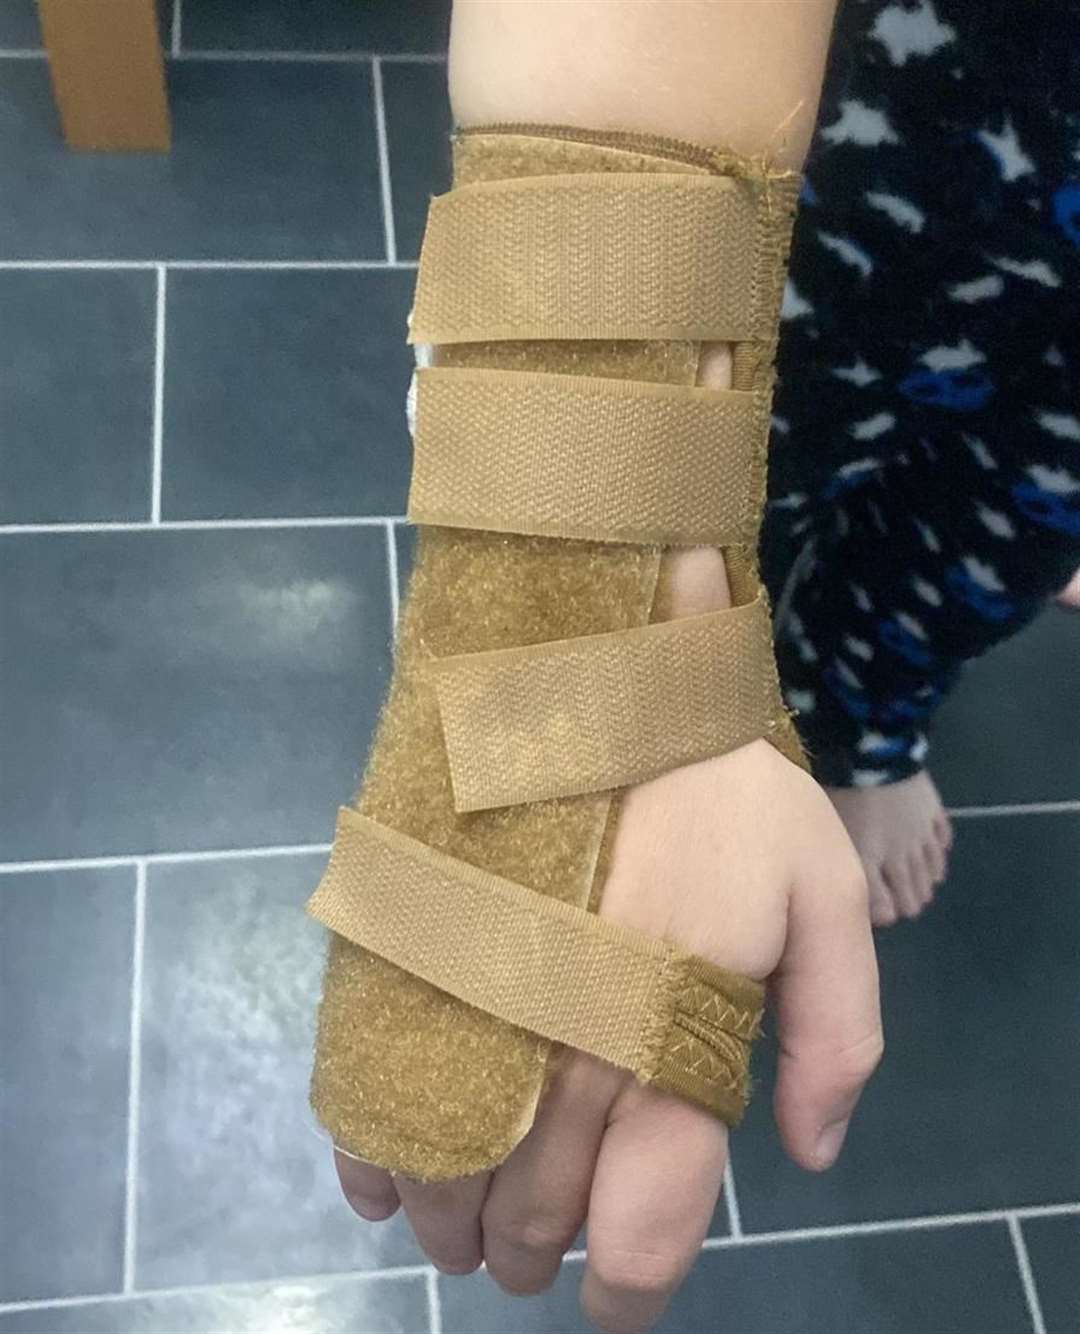 The child is awaiting x ray results but has been given a brace for his wrist in the meantime